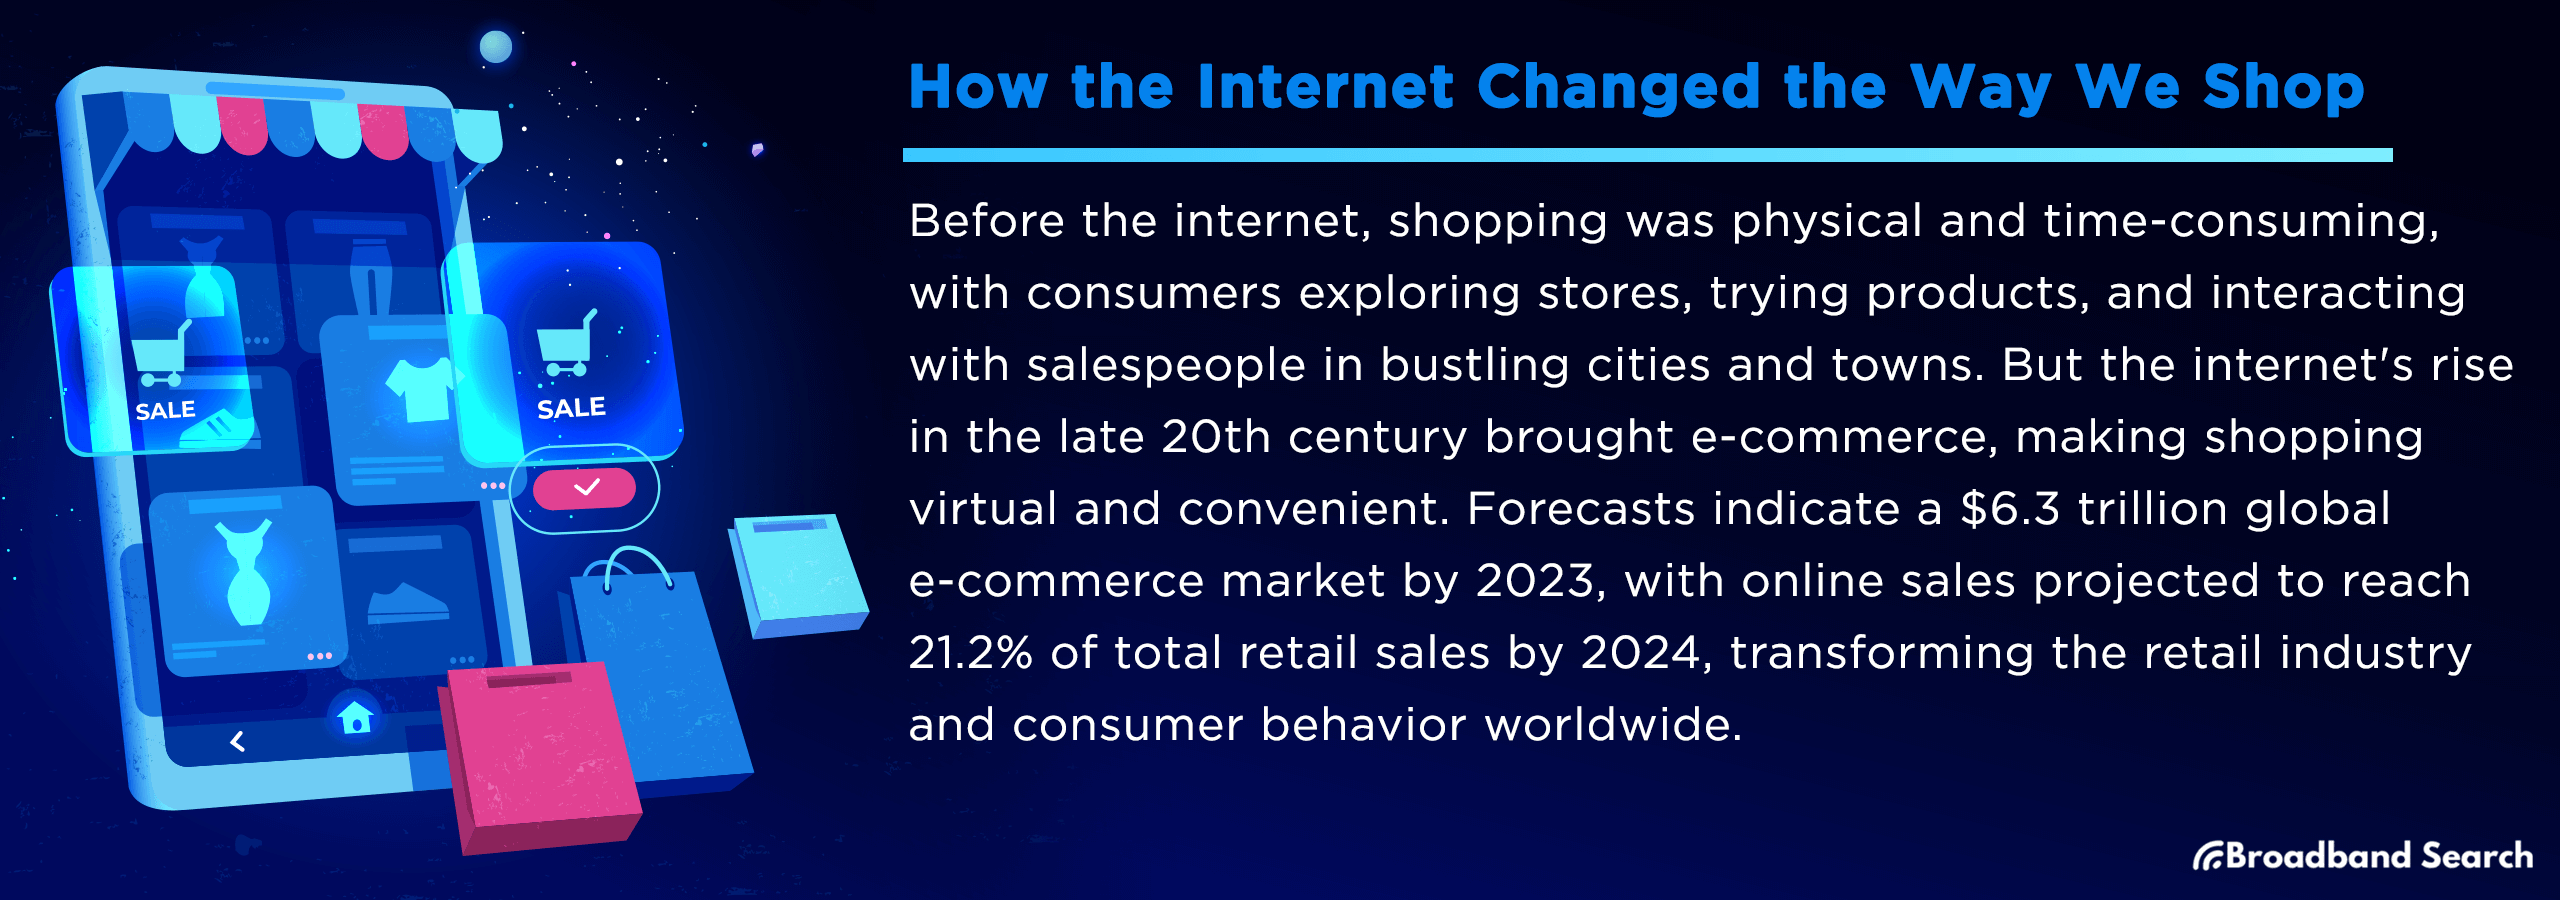 How the Internet Changed the Way We Shop